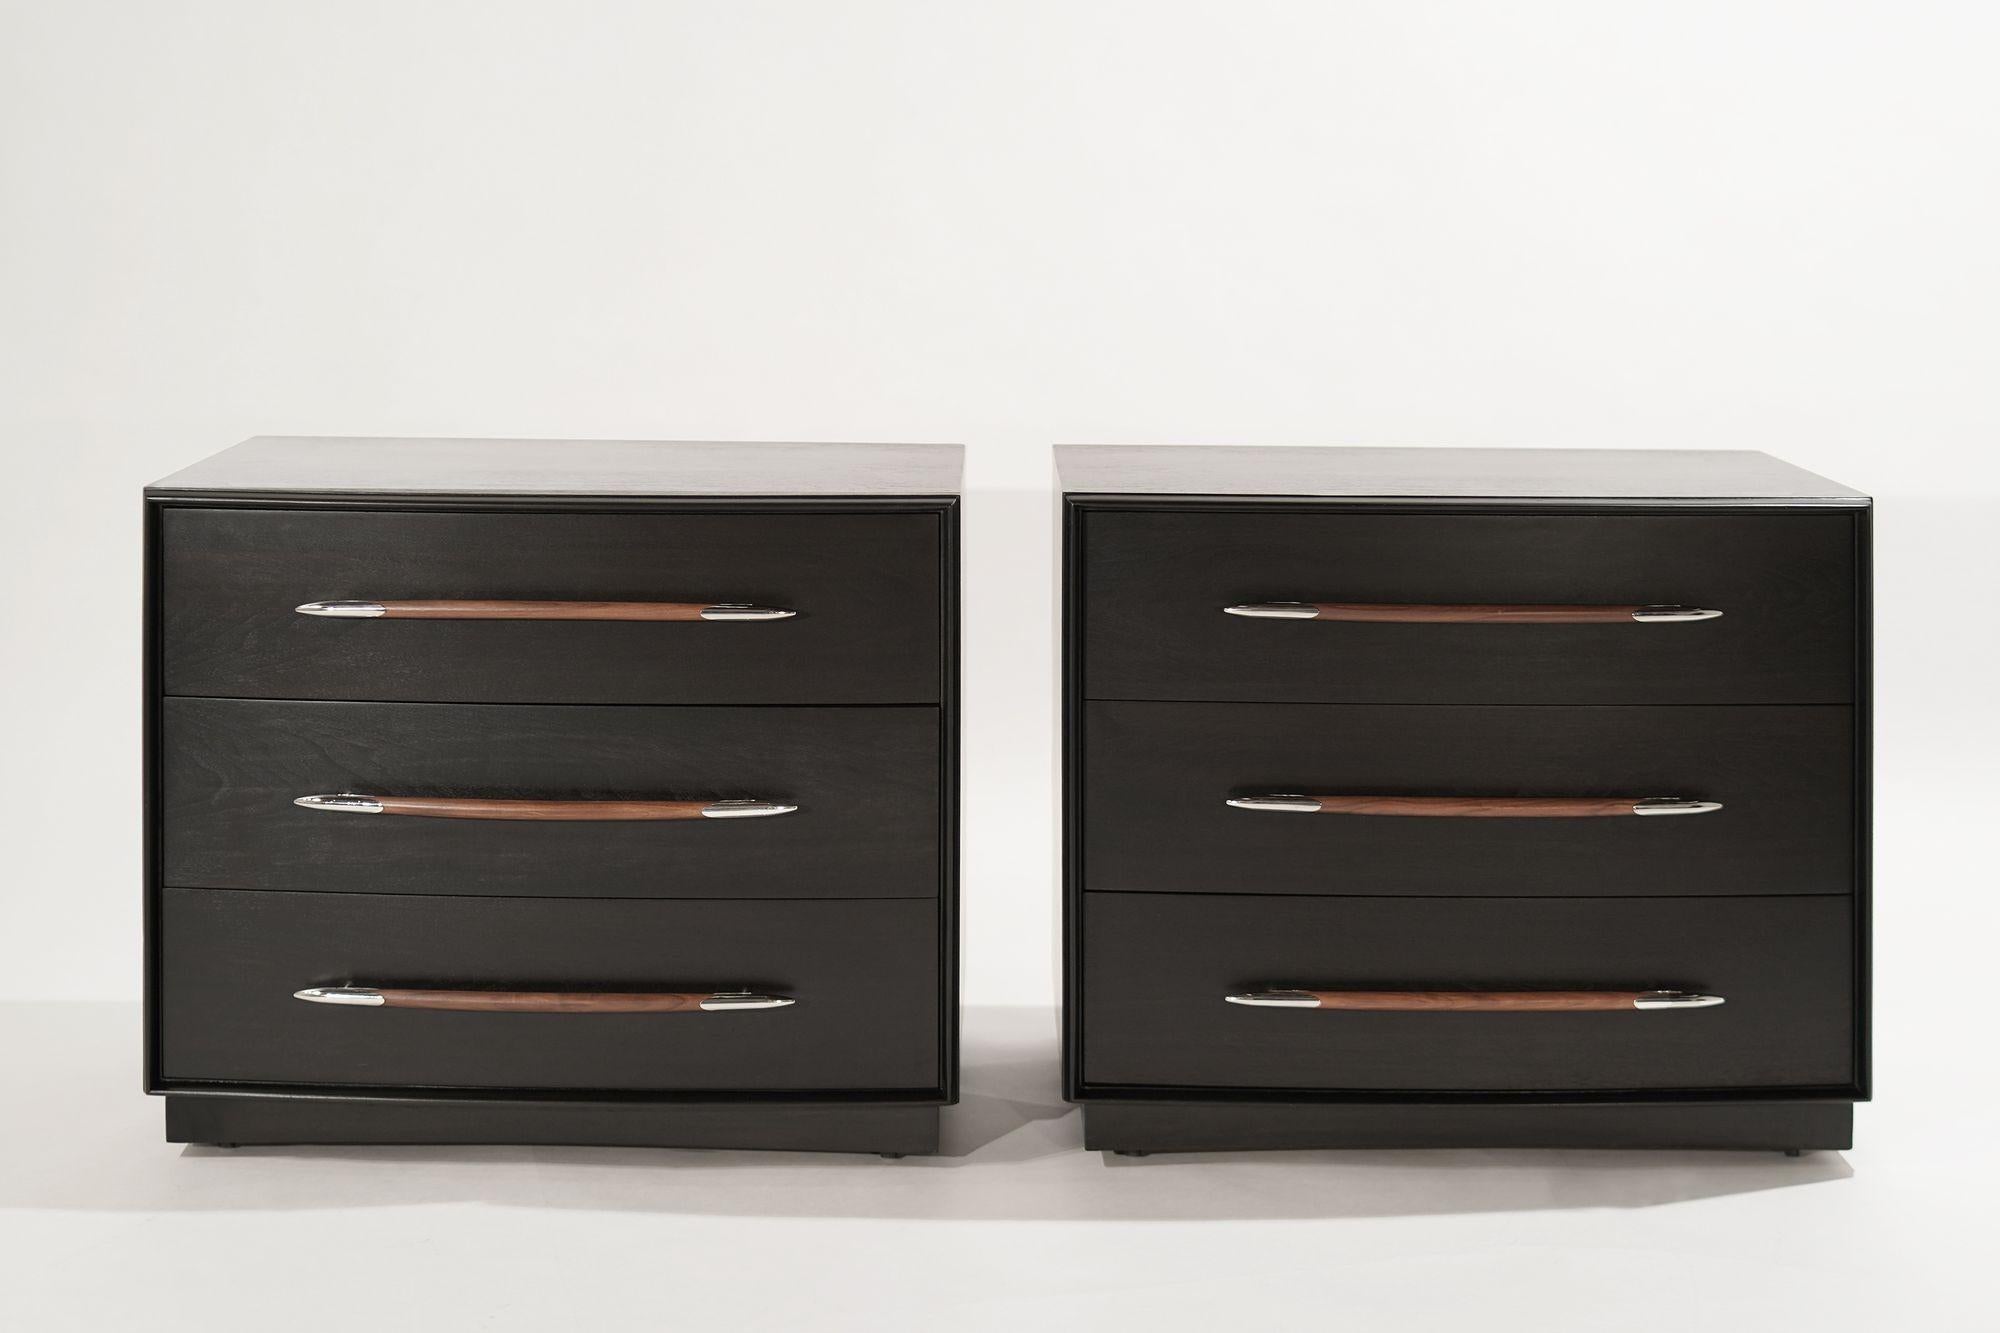 Rare set of matching bedside tables or chests of drawers designed by T.H. Robsjohn-Gibbings for Widdicomb, circa 1950-1959. Completely restored walnut cases done in ebony, contrasting walnut handles highlighted by spear-tip nickel hardware.
